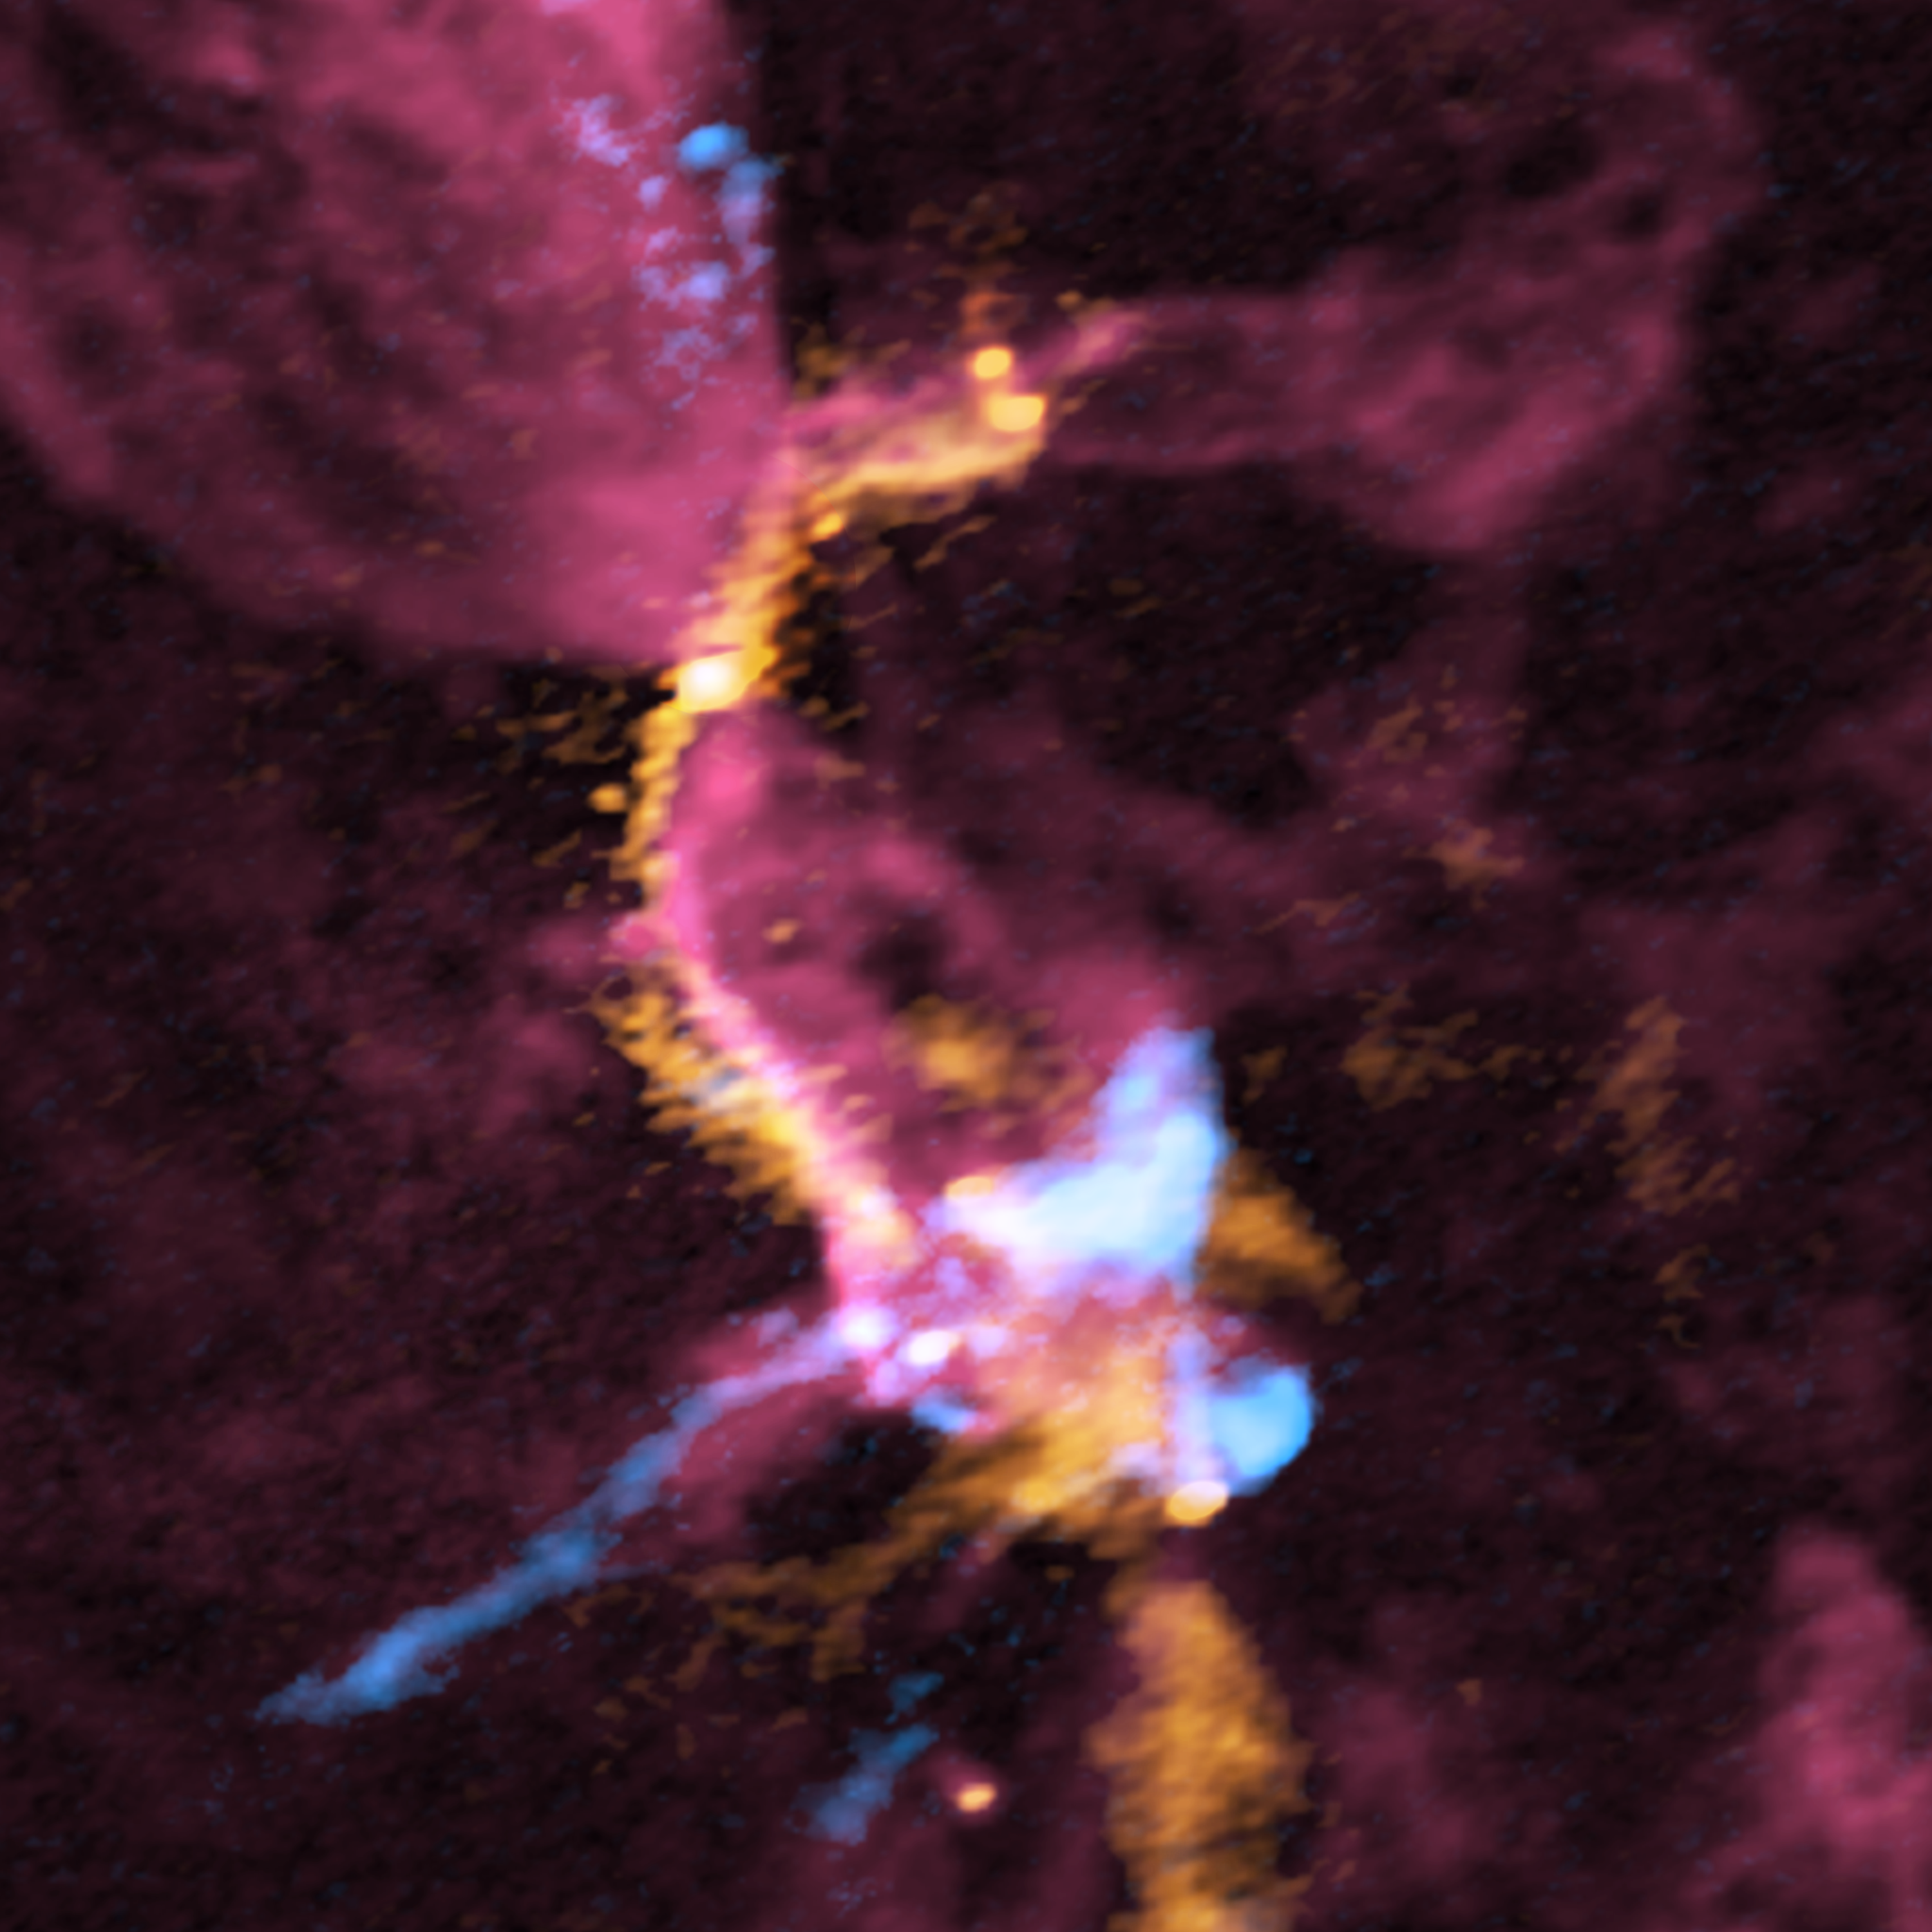 Composite image of the cluster forming region, OMC-2/ FIR 3 and FIR 4, obtained with ALMA (red: carbon monoxide gas, orange: emission from the dust, blue: silicon monoxide gas). For each color, the stronger the radio wave intensity, the more whitish the color is. FIR 3 is located in the upper left of this image, while FIR 4 is located in the bottom right. The giant molecular outflow driven by the protostar in the FIR 3 region (red color) collides with the “filamentary molecular cloud” (orange color). Subsequently, outflow gas interacting with the filamentary molecular cloud is being compressed (shown in pinkish red). The outflow gas also collides with downstream dense gas (shown in orange color) where a group of baby stars is being born (green circles within the FIR 4 region). The shock layers are observed with the silicon monoxide gas (pale blue). The white bar in the lower right corner shows the scale of 4000 astronomical units (au). Credit: ALMA (ESO/NAOJ/NRAO), A. Sato et al.